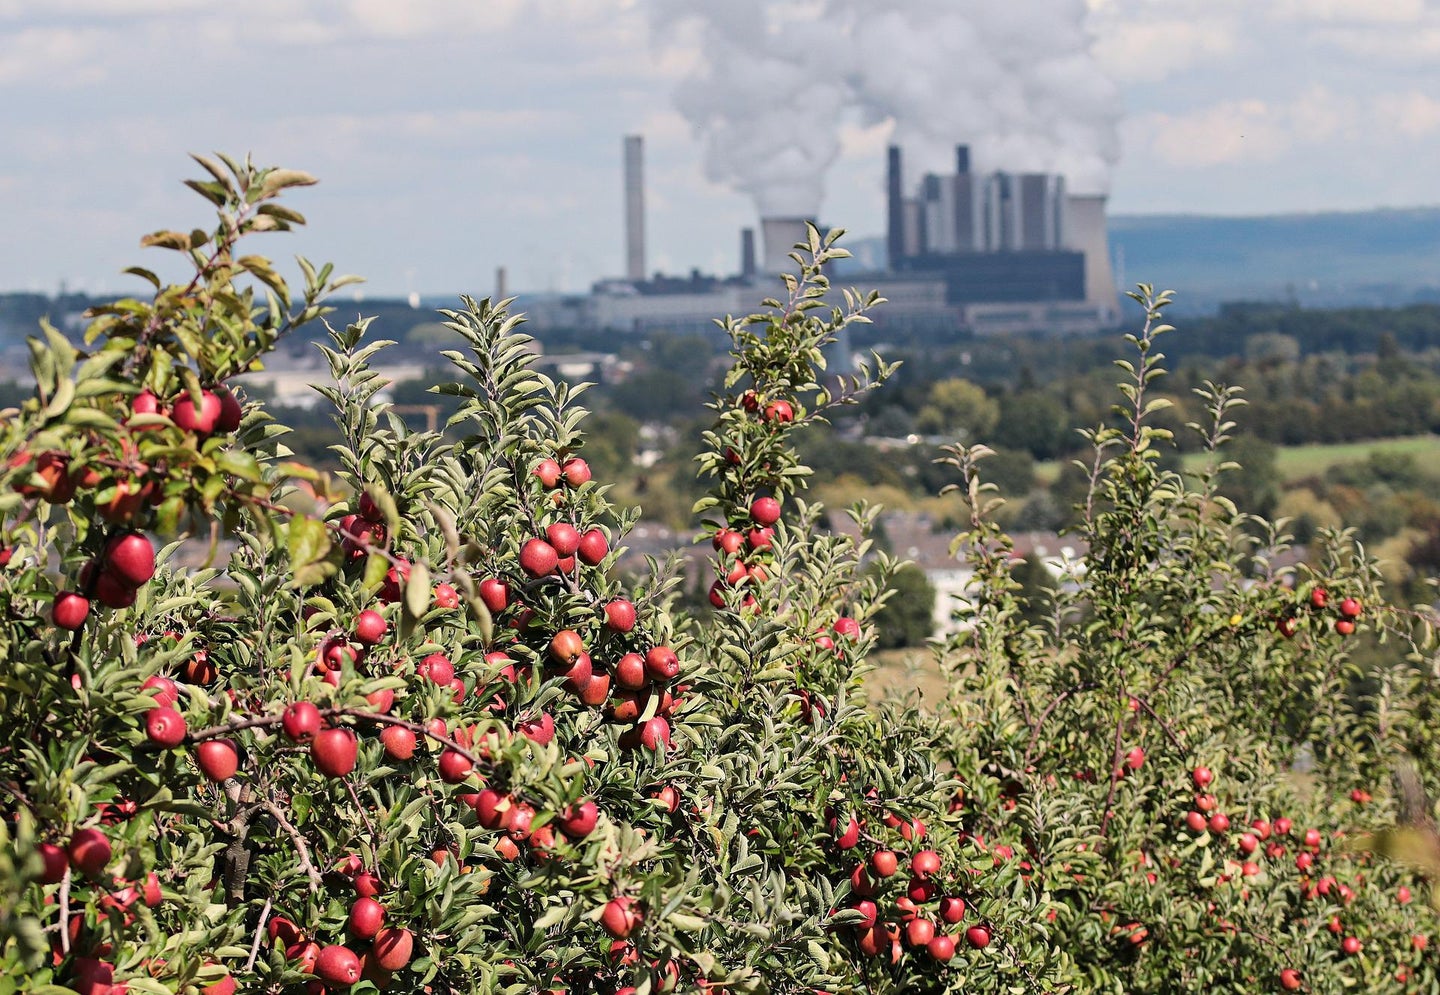 Trees grow with power plant pollution in the background.